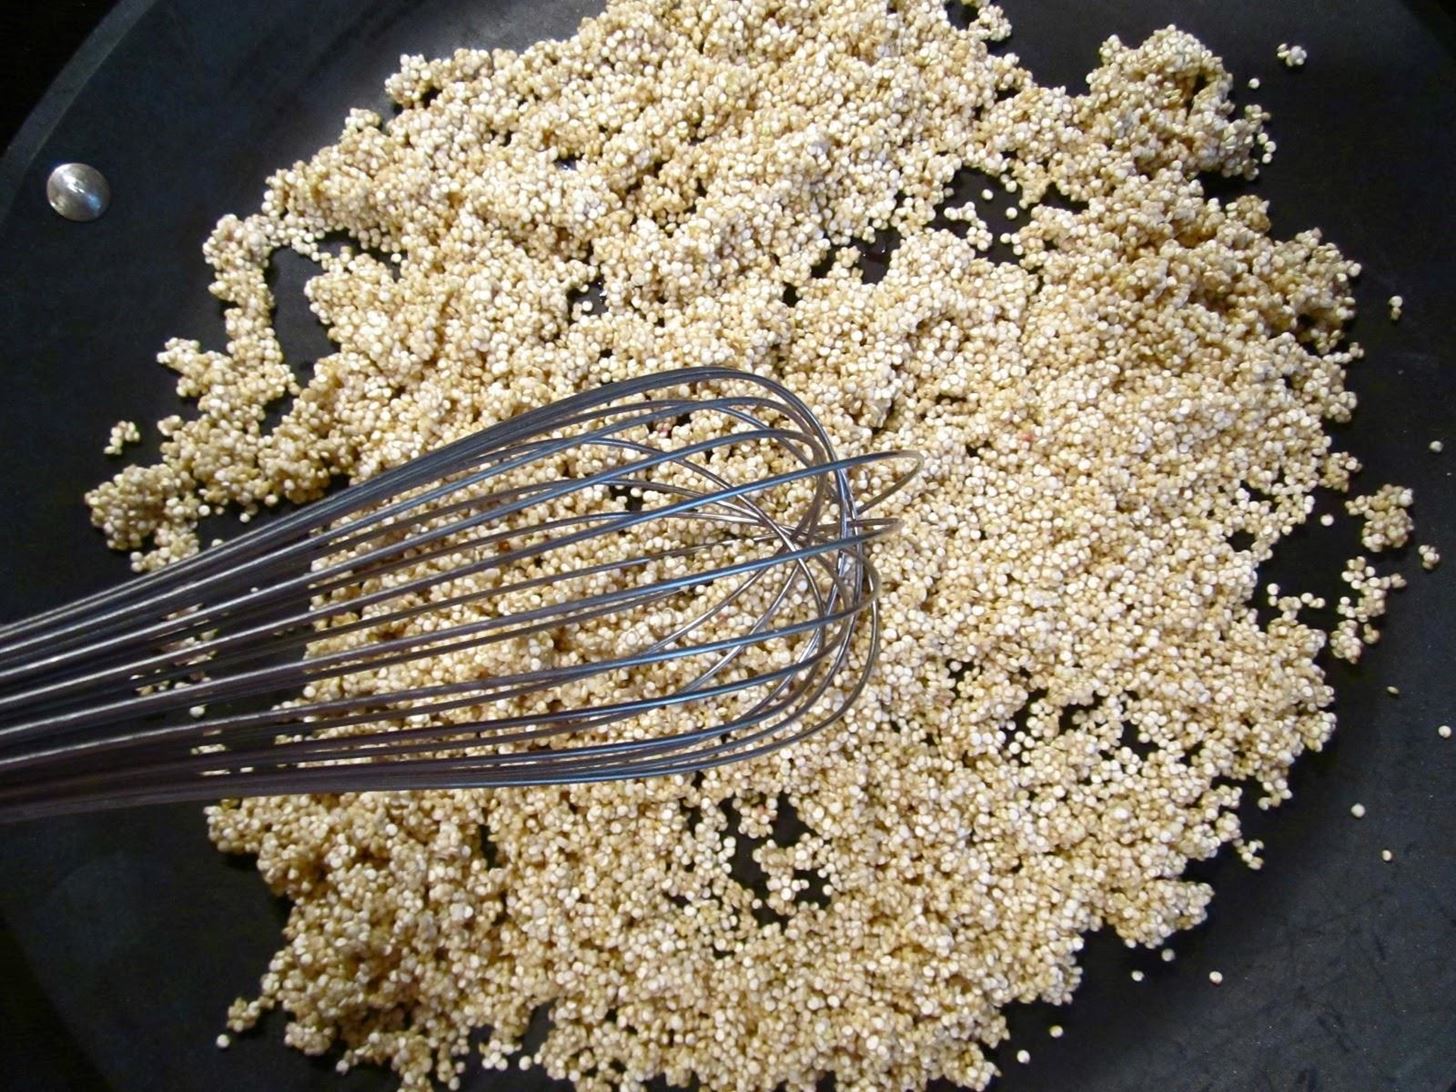 This Simple Step Will Take Your Quinoa to the Next Level